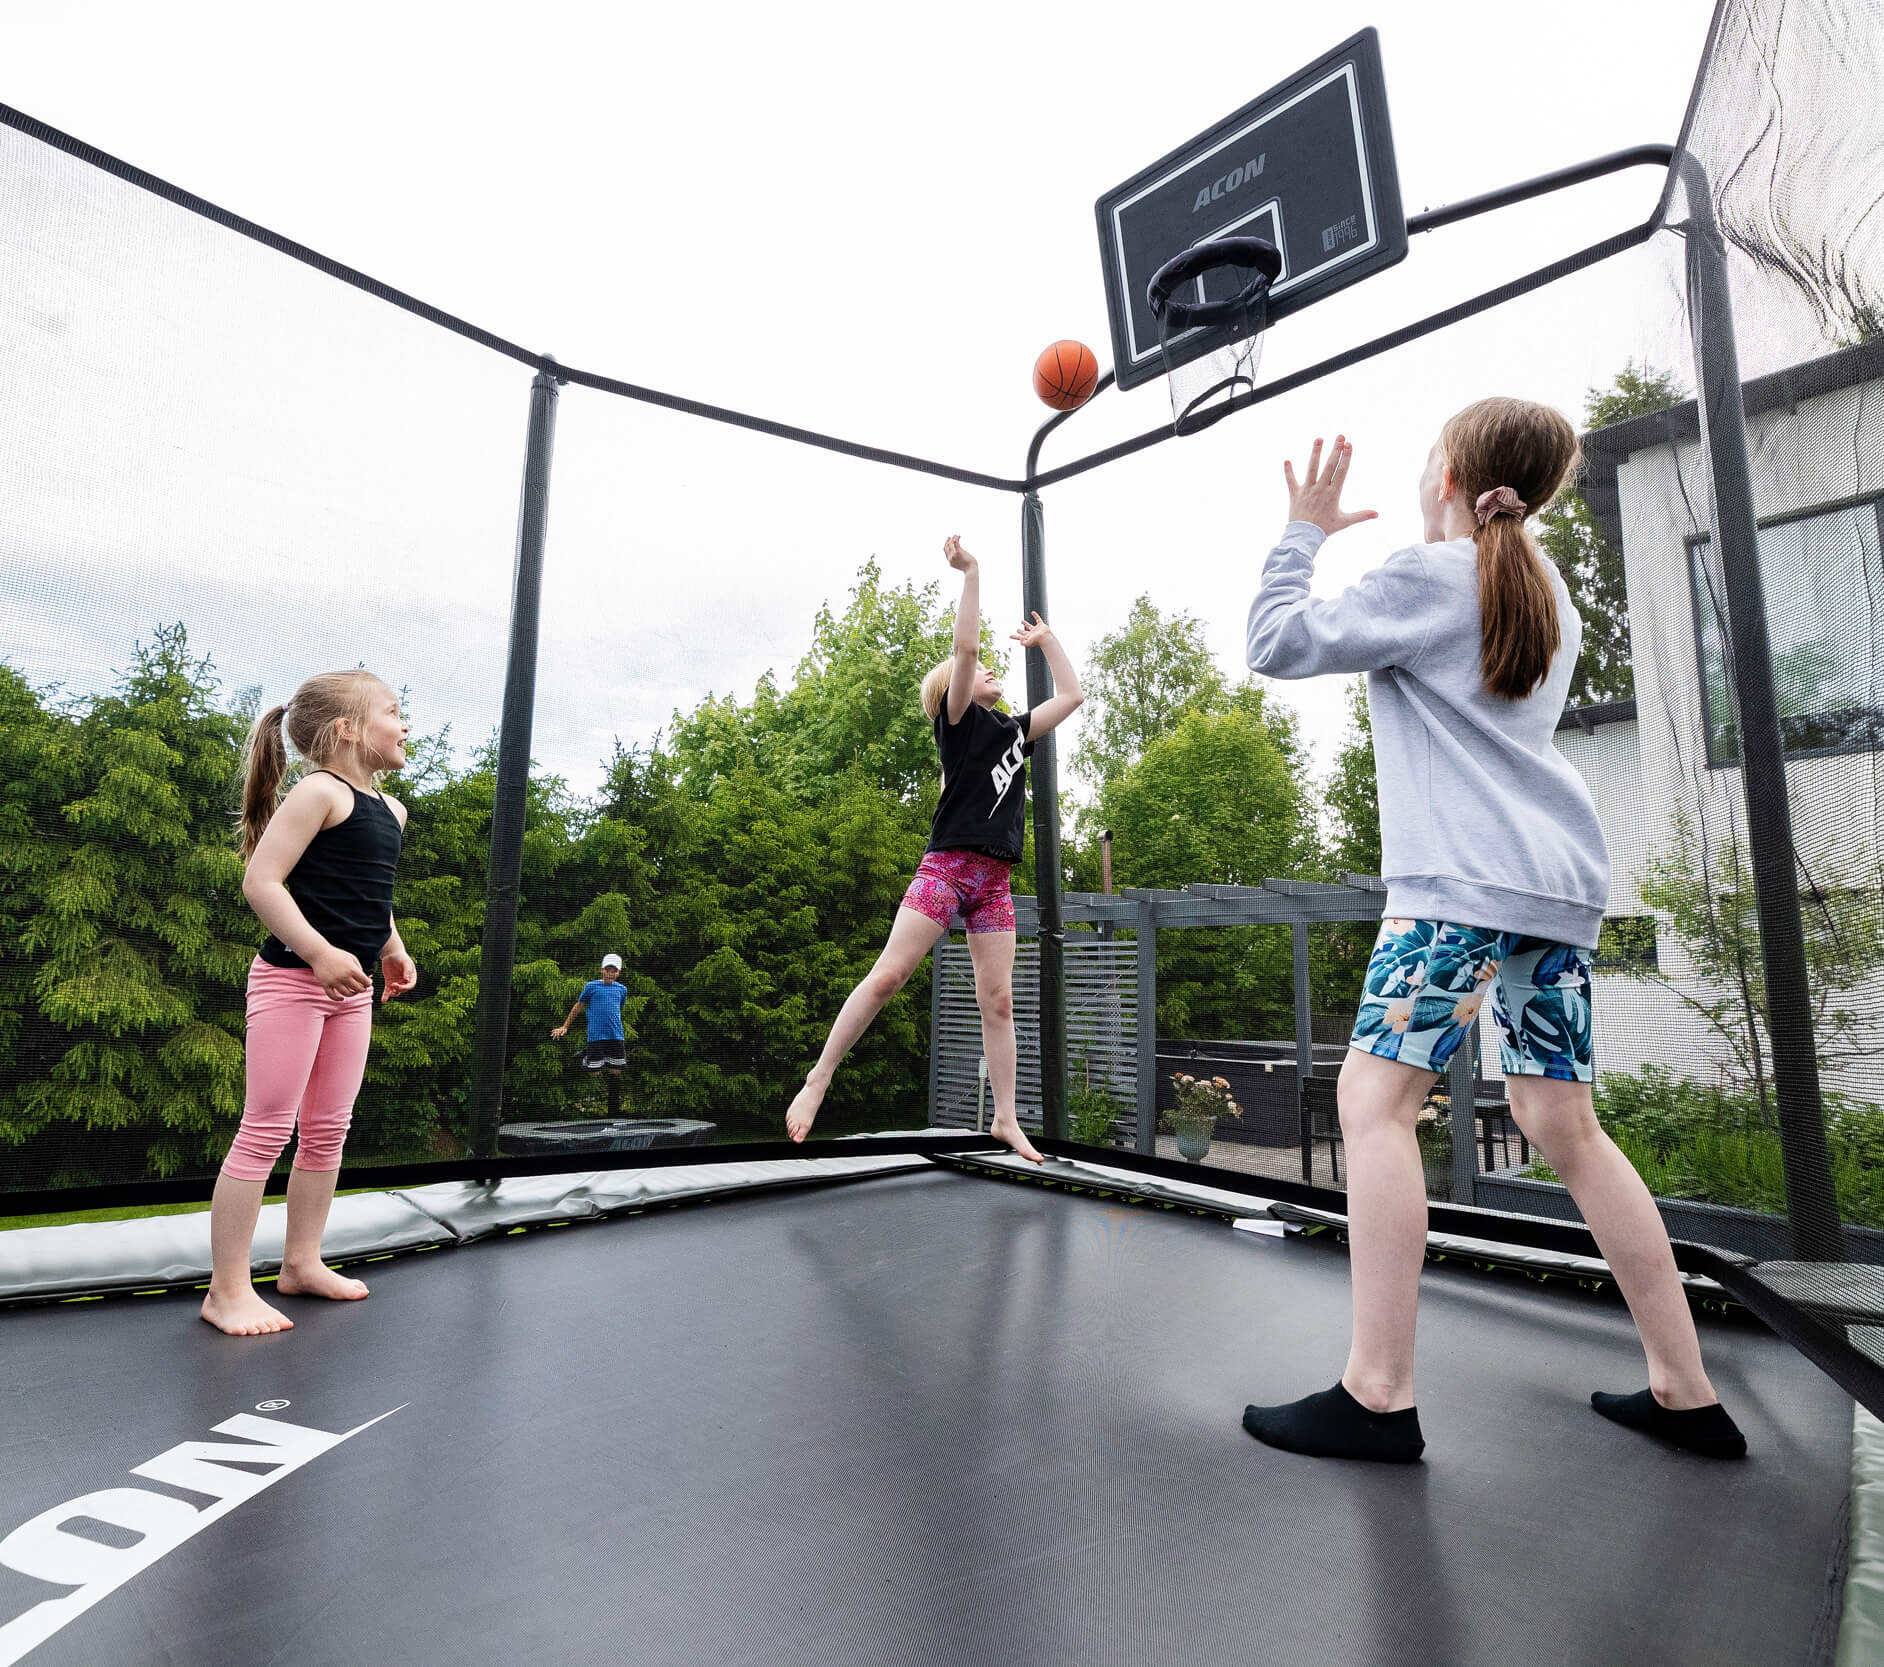 3 girls playing basketball on a trampoline with safety net.